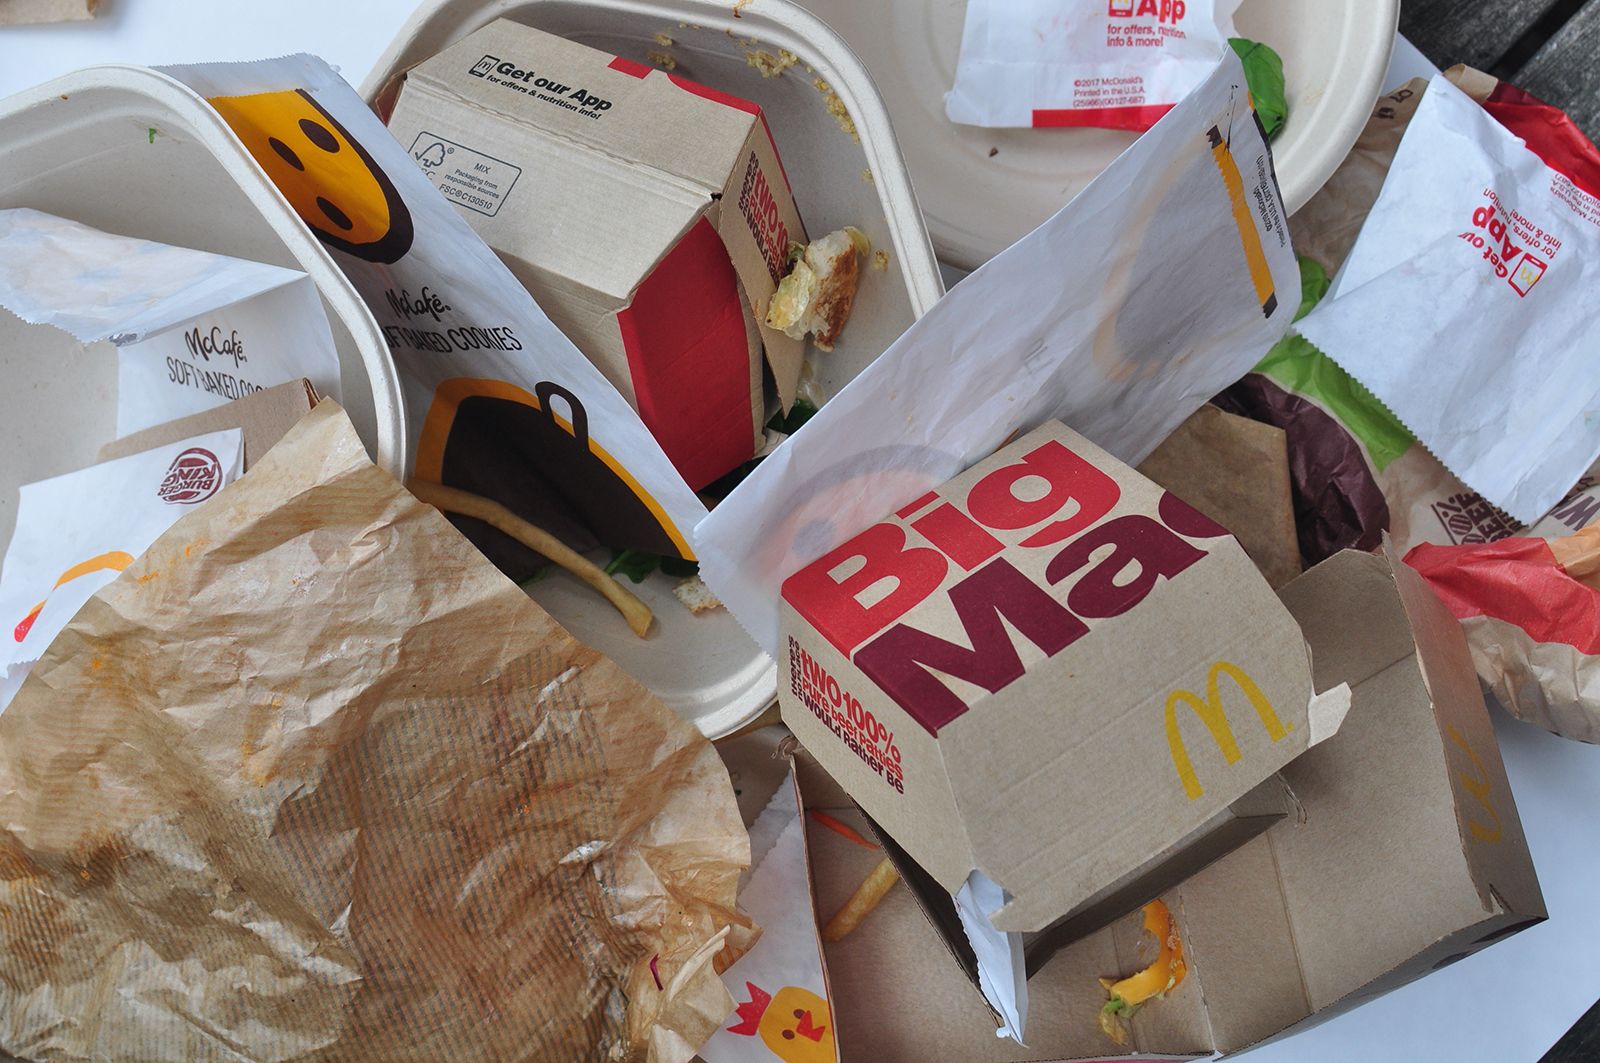 Toxic chemicals may be in fast food wrappers and take-out containers,  report says